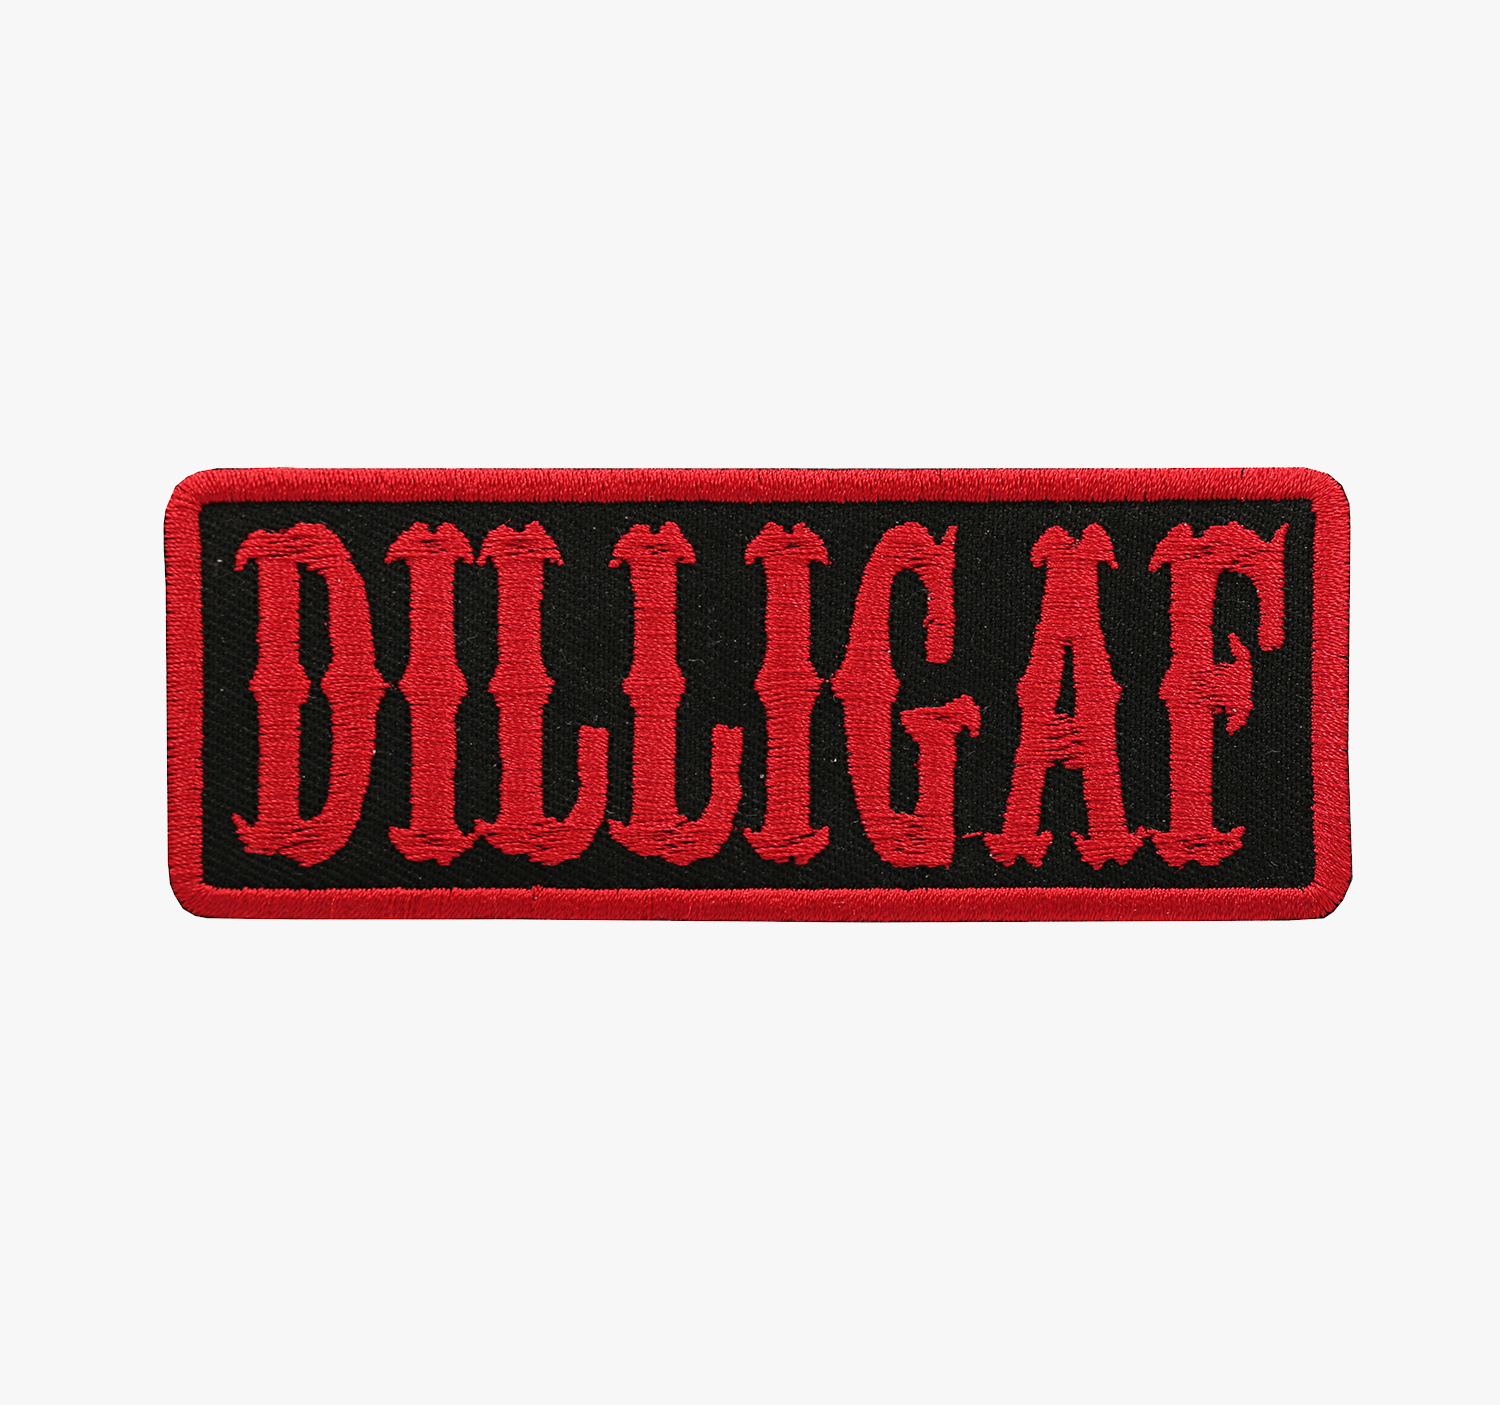 DILLIGAF Embroidered Iron or Sew-on Patch Humor Funny Saying Biker Emblem